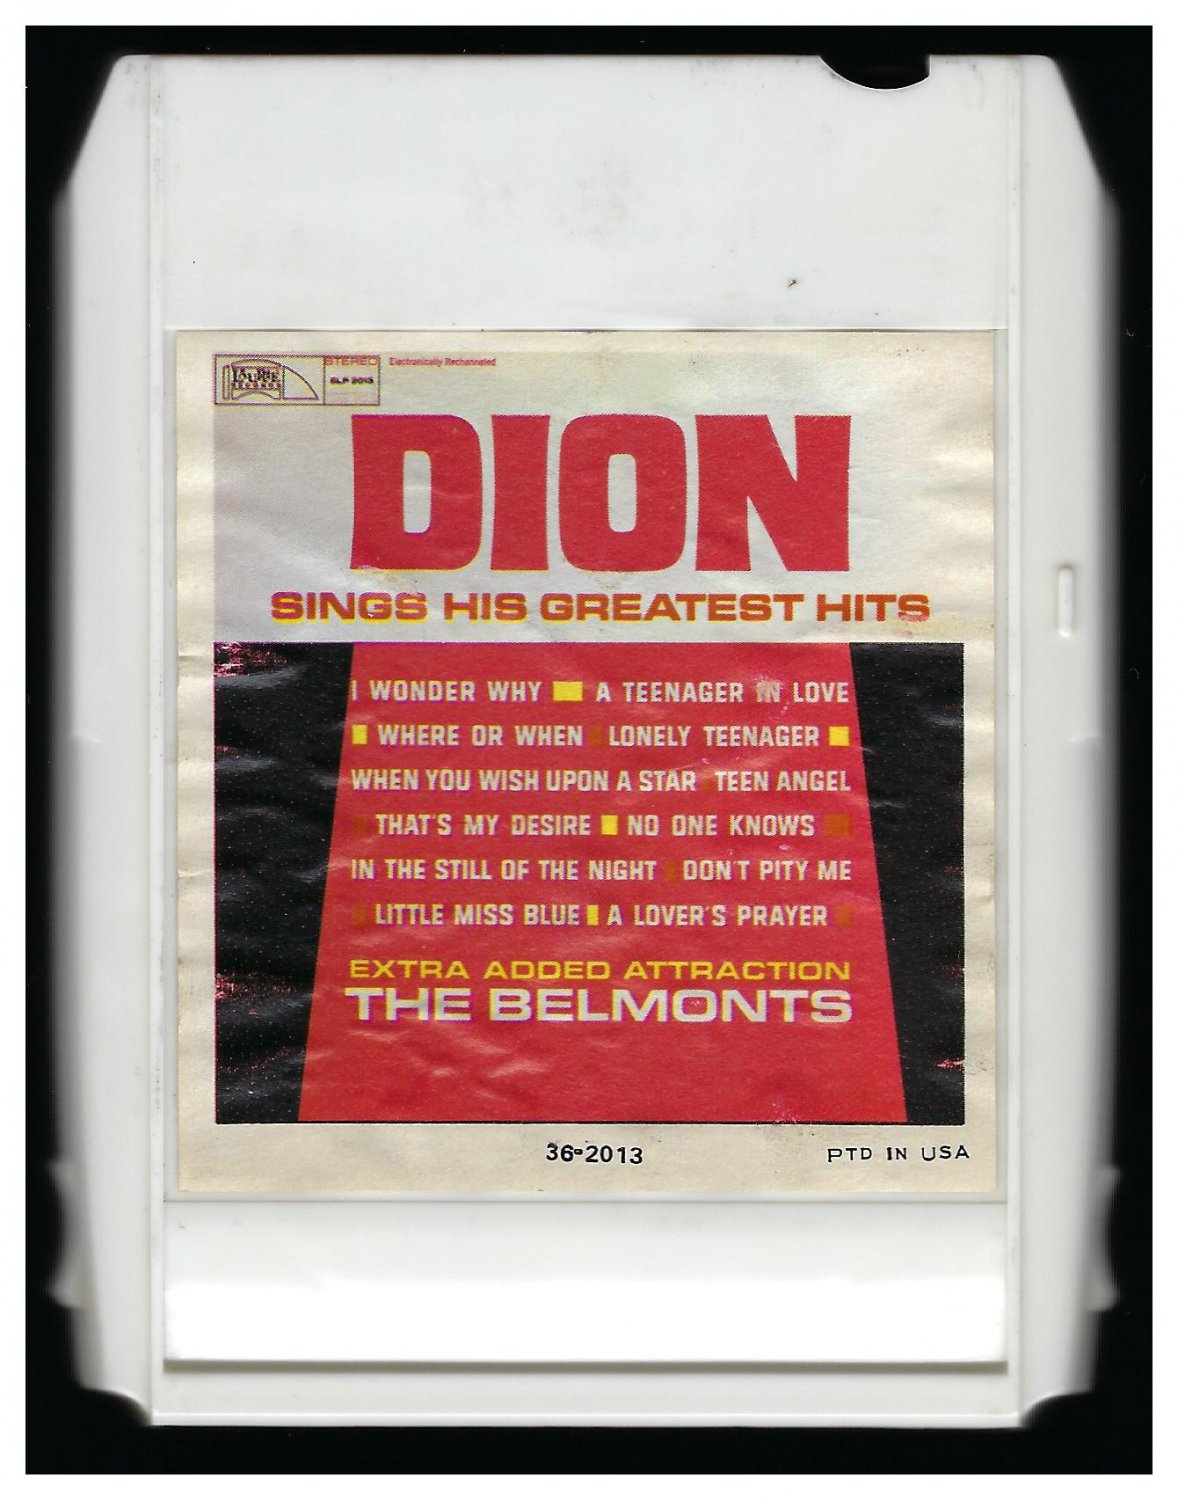 Dion and the Belmonts - Sings His Greatest Hits 1962 ITCC LAURIE A25 8-TRACK TAPE